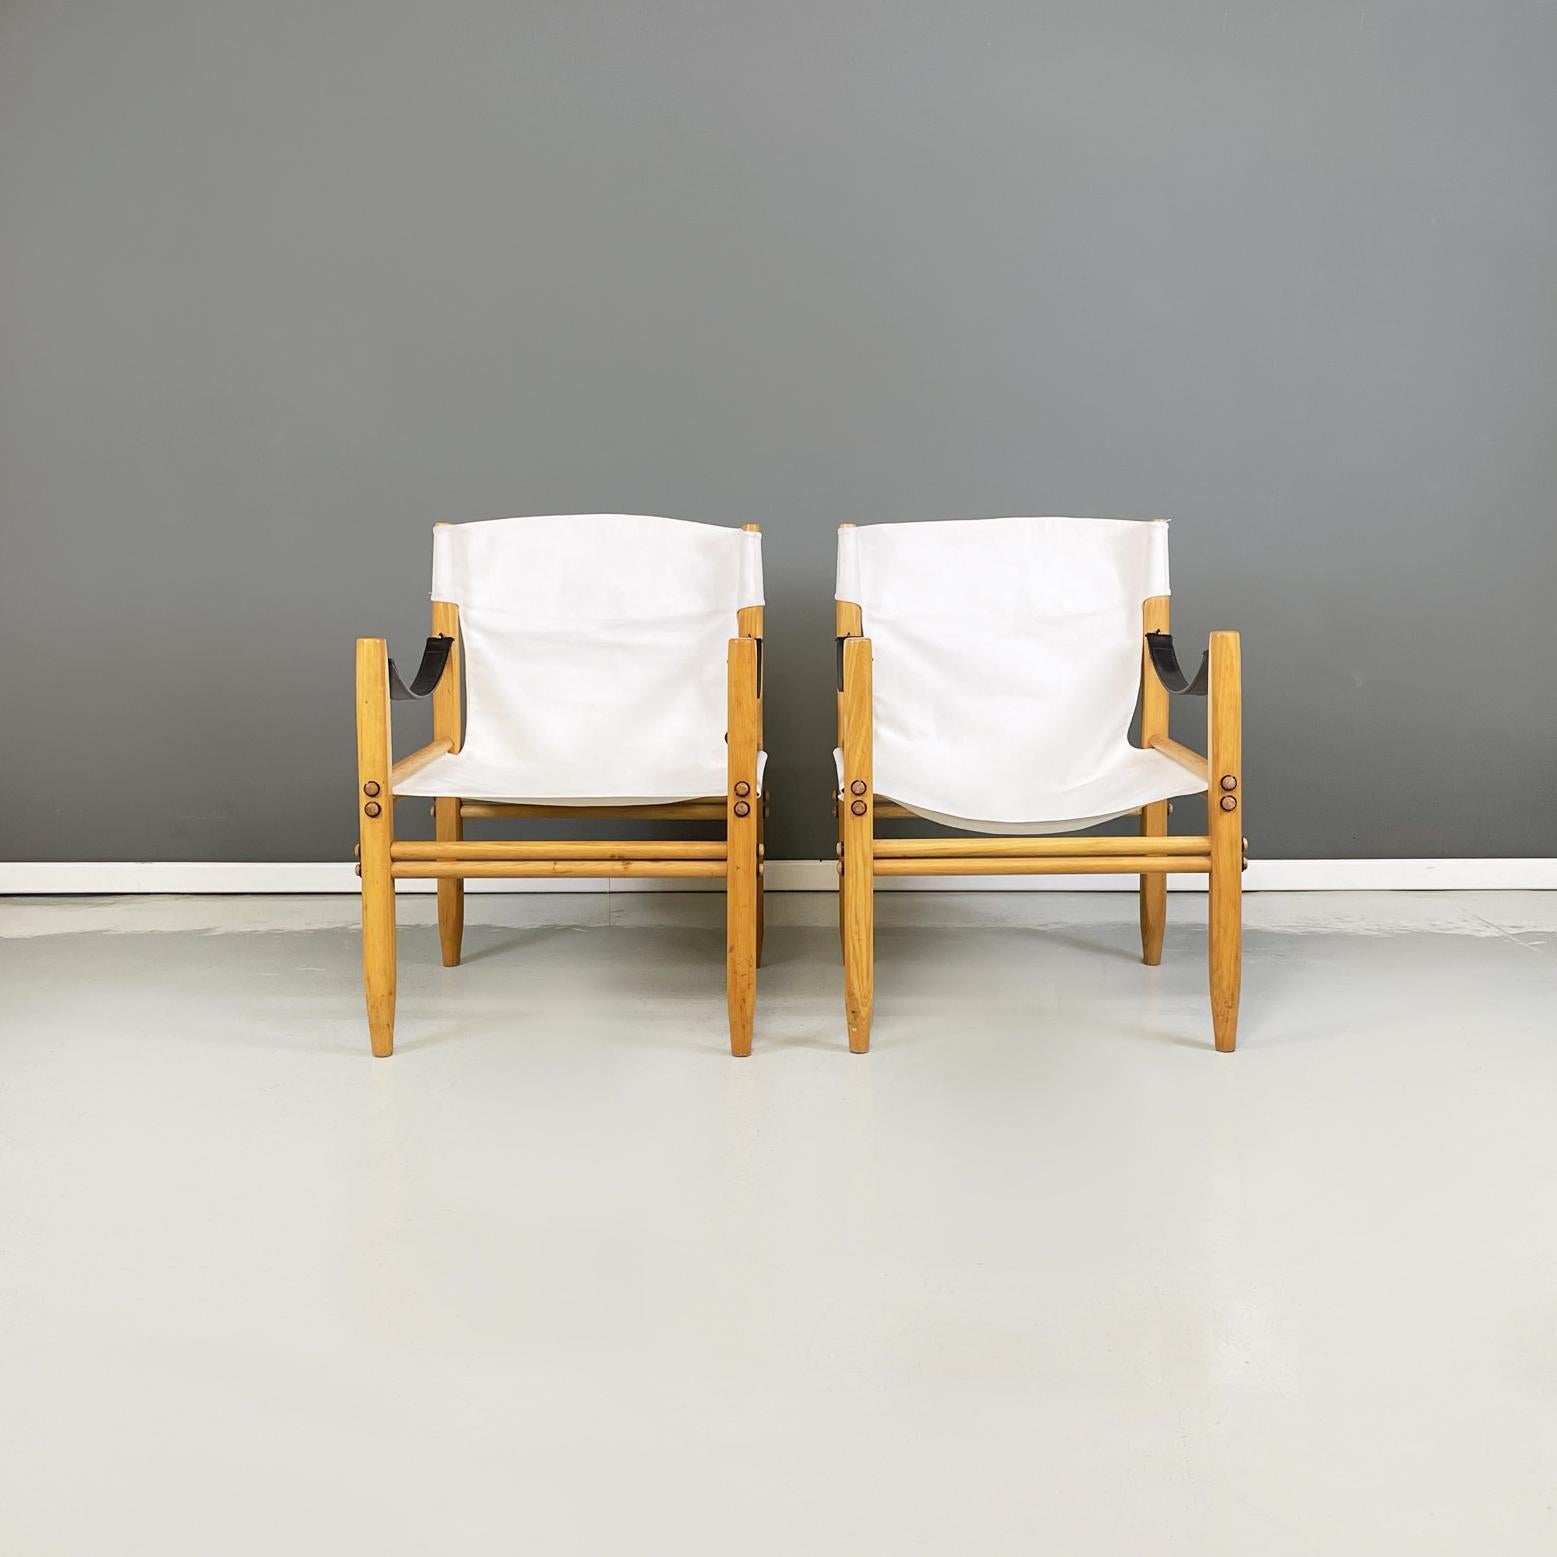 Italian midcentury Armchairs Oasi 85 Safari by Gian Franco Legler Zanotta, 1960s
Pair of armchairs mod. Oasi 85, also known as Safari, in white fabric and light wood. The seat and backrest are composed of a single fabric, fixed to the structure.